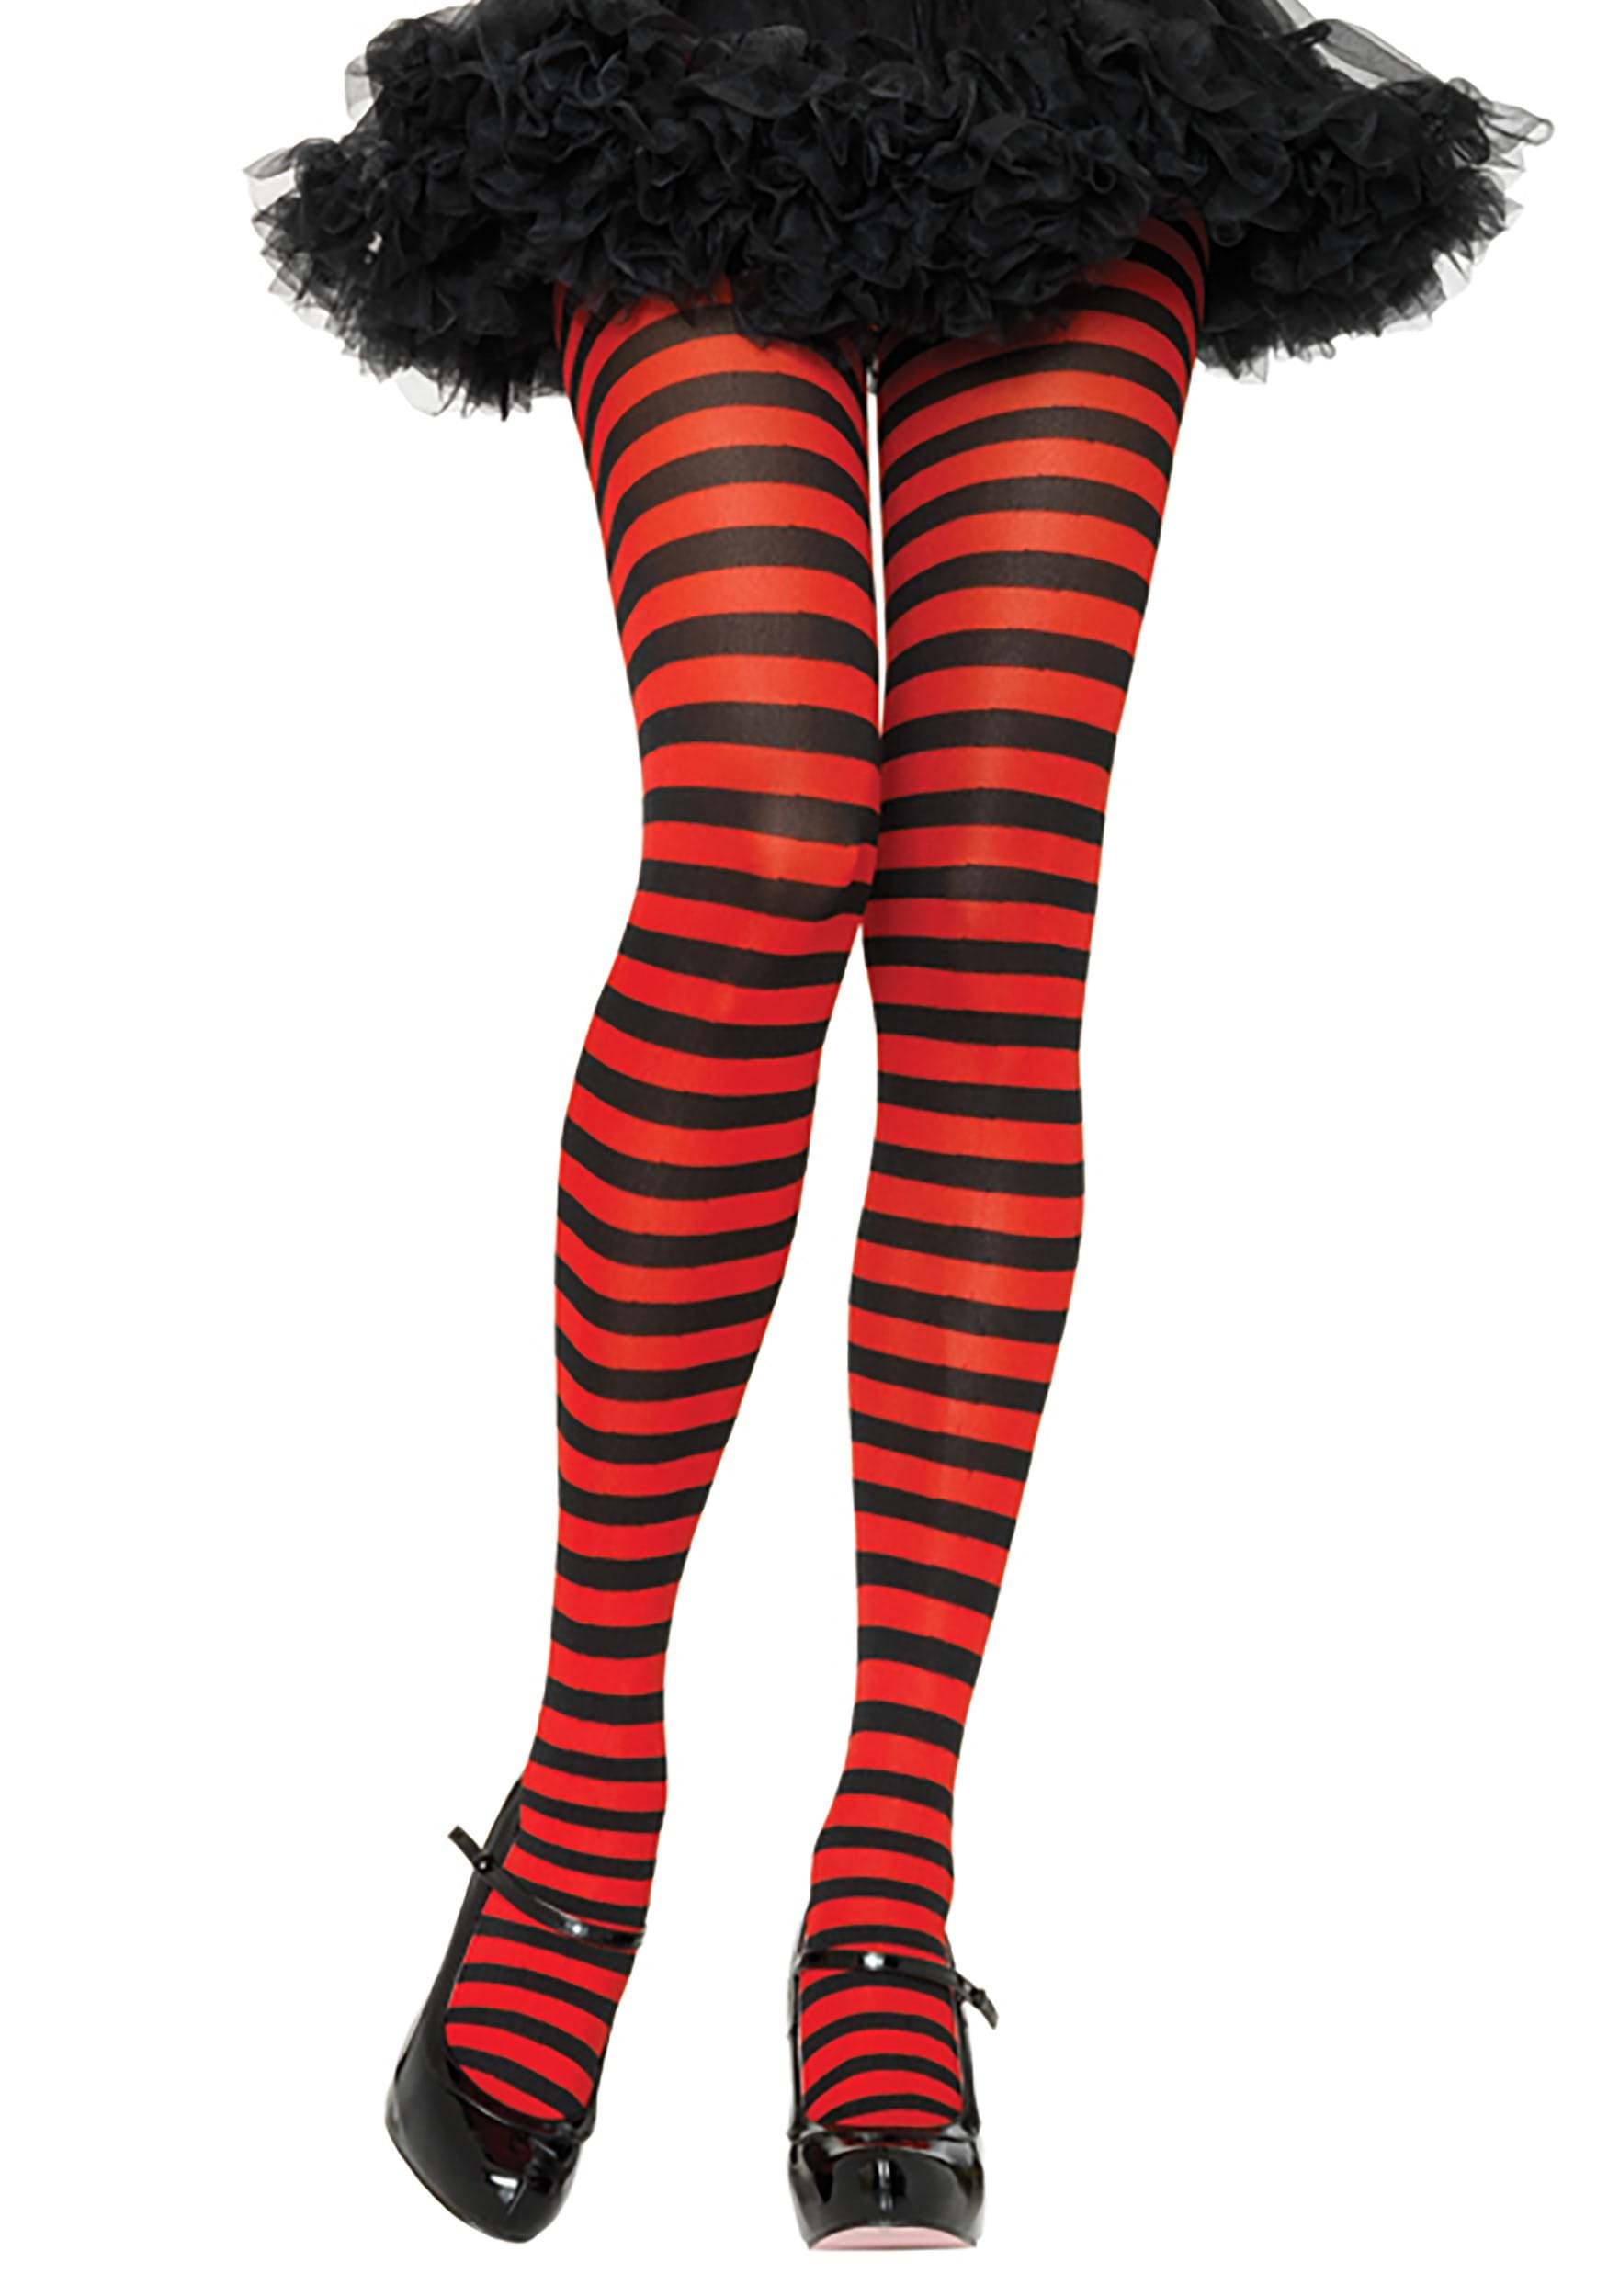 Black and Red Striped Adult Nylon Tights